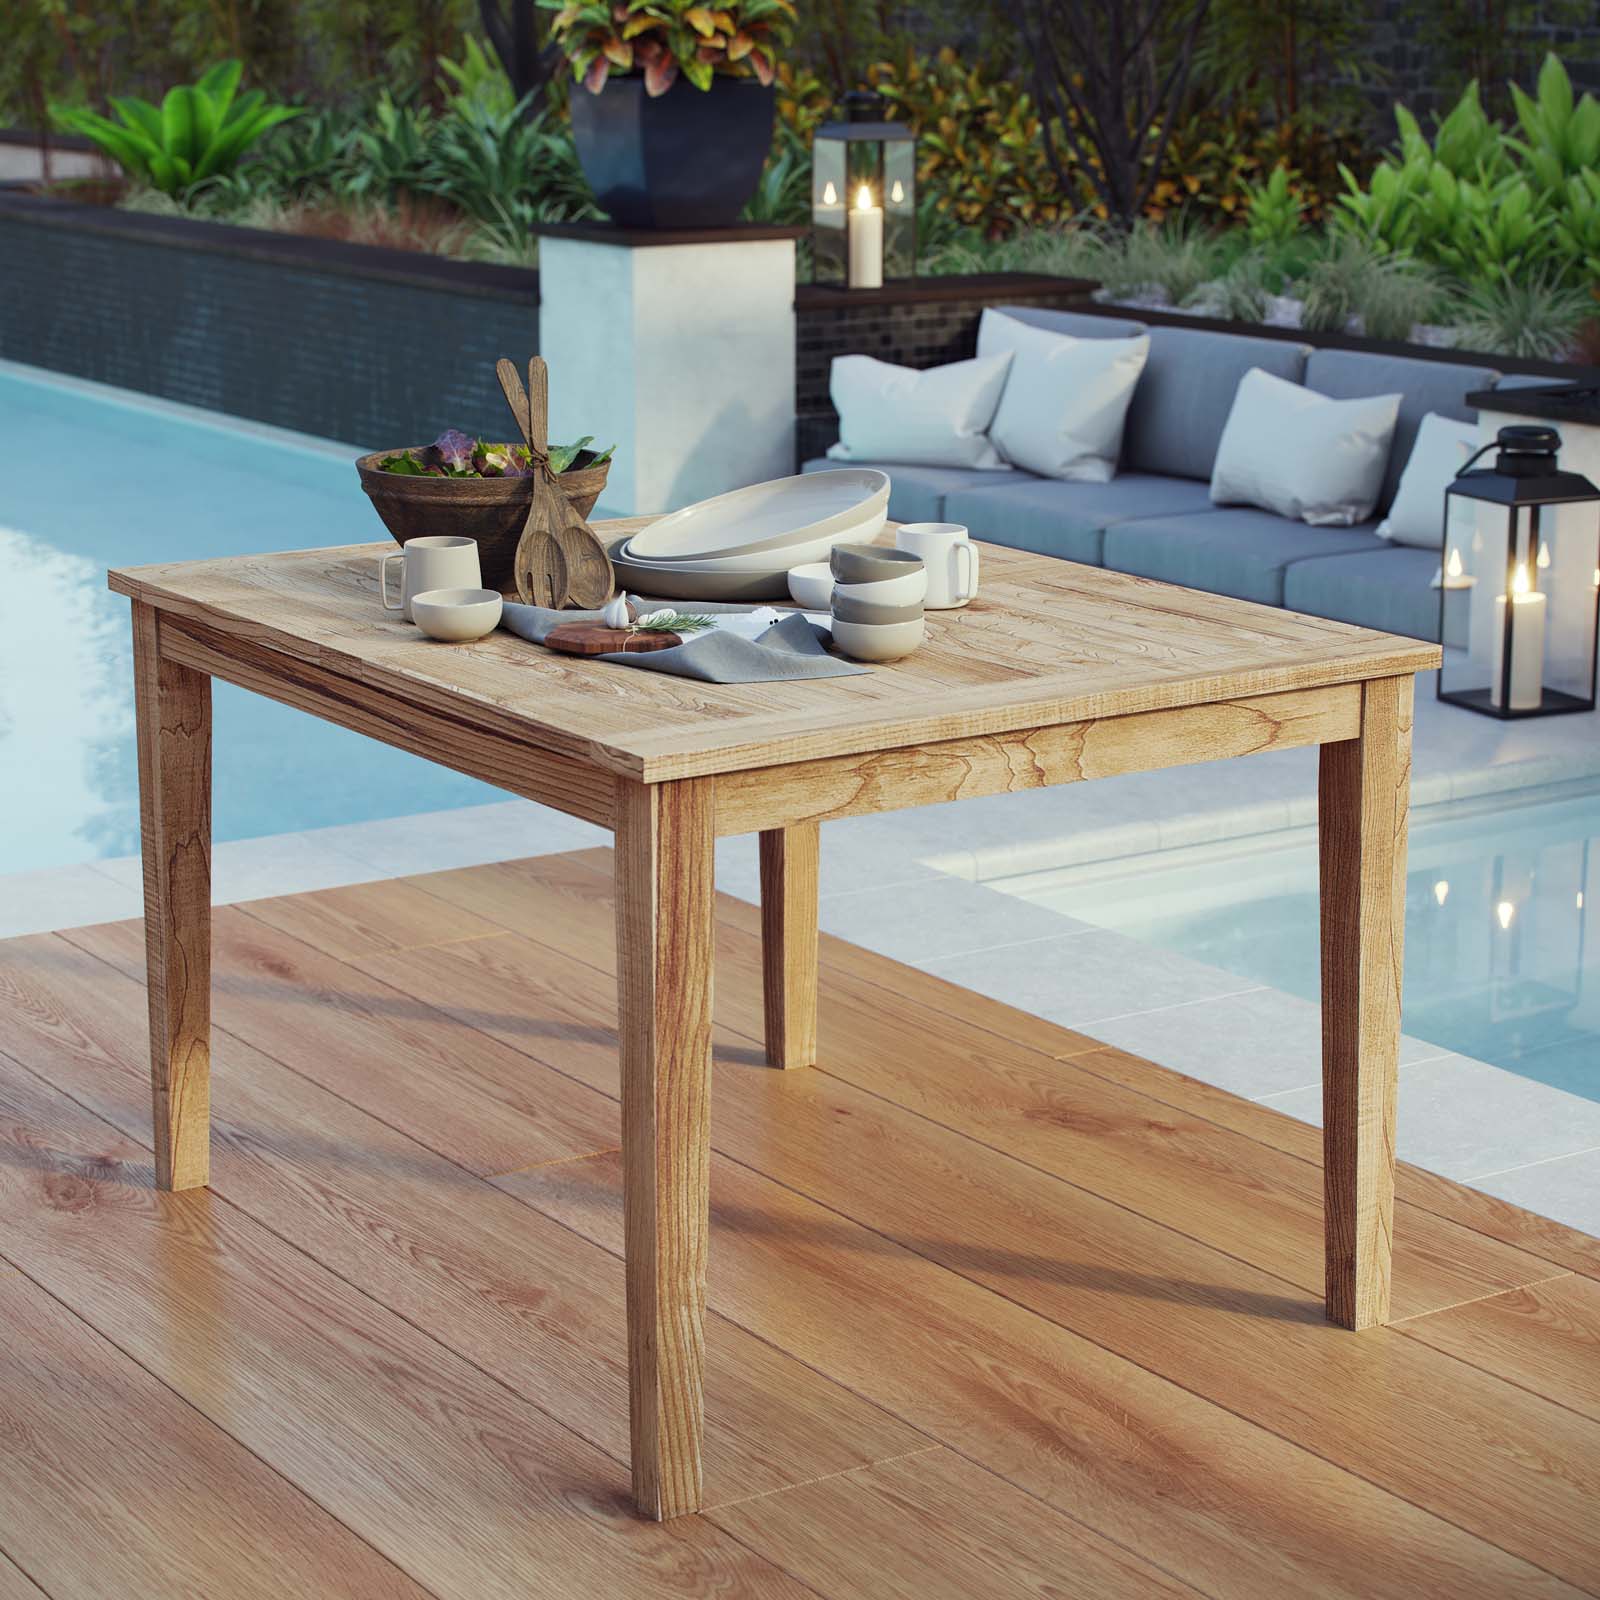 Stylish And Durable Teak Outdoor Tables For Your Patio